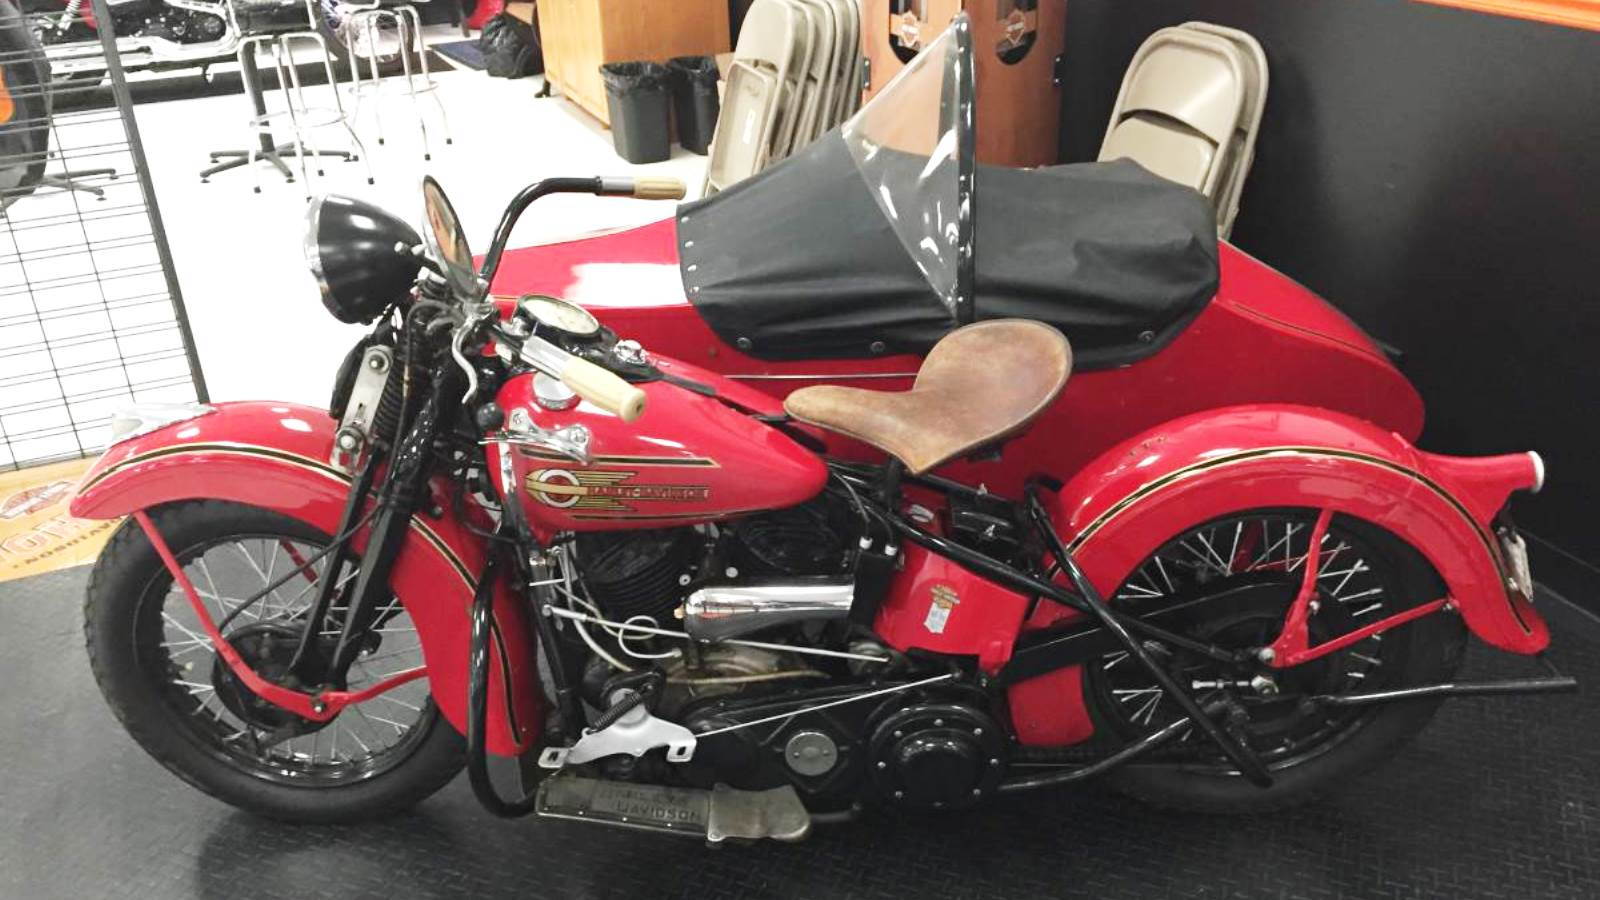 10 Most Expensive Harleys Sold on eBay in the Past 90 Days | Hdforums